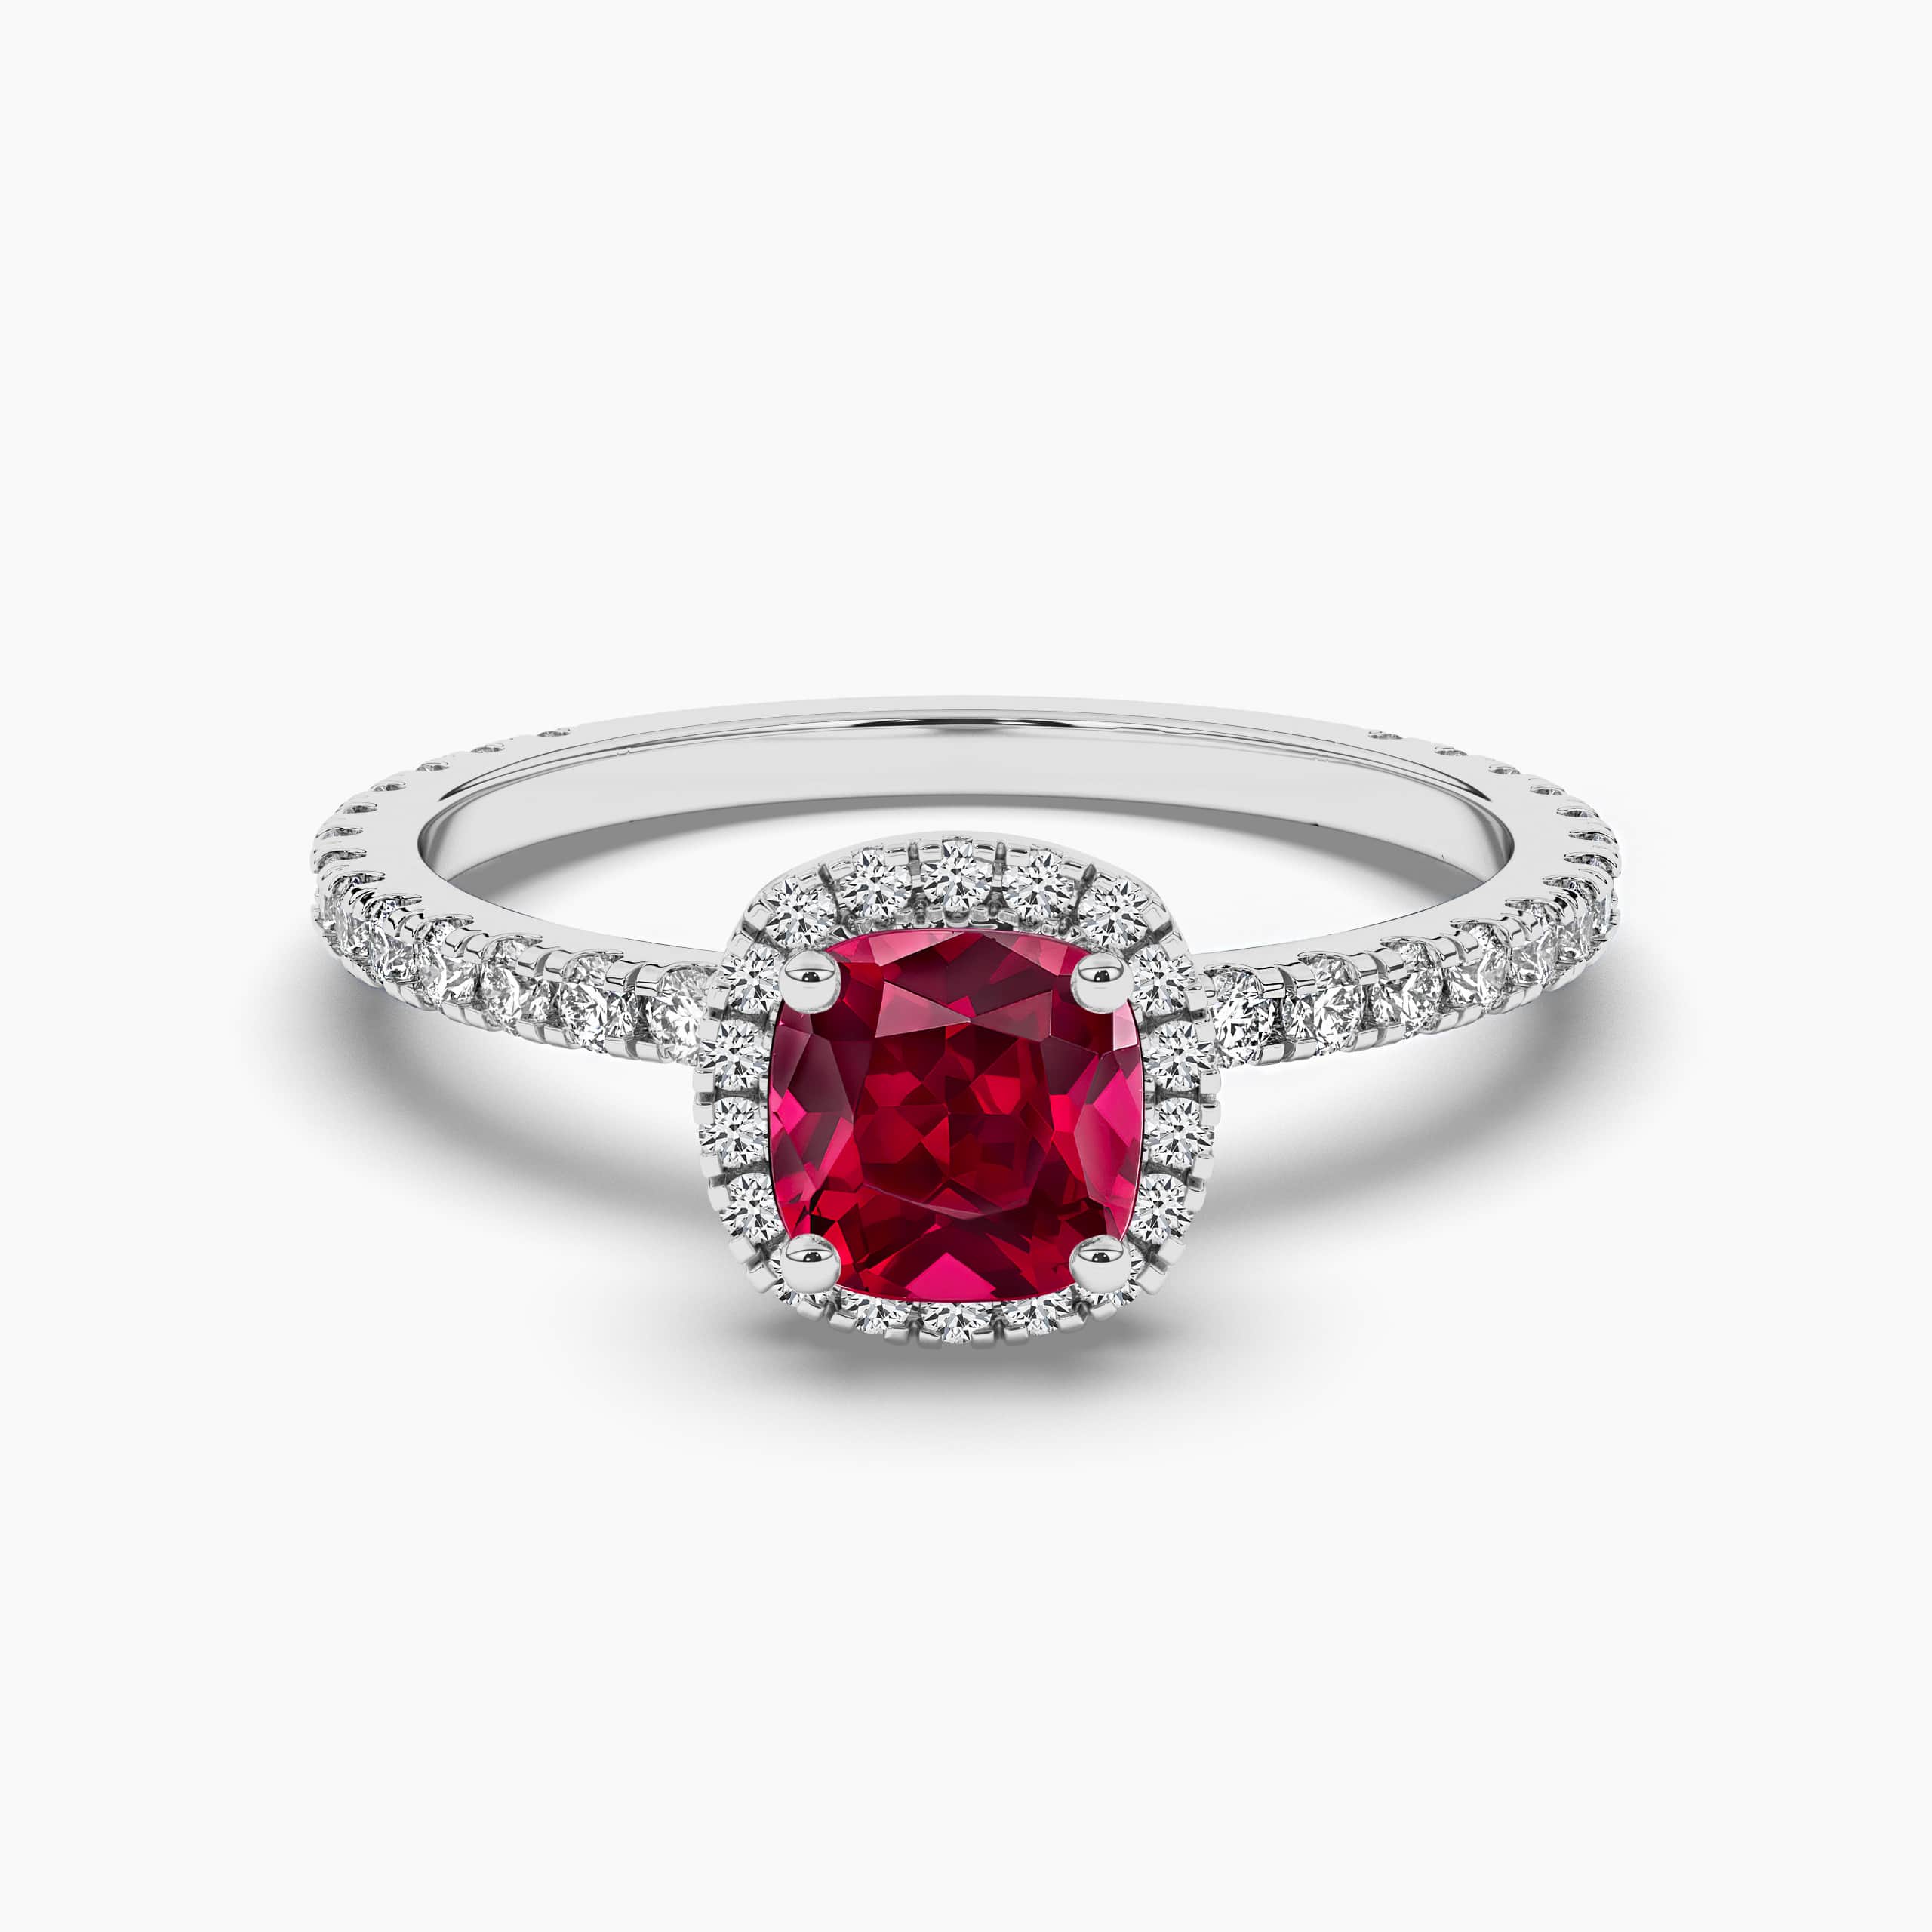 Cushion Cut Ruby Ring With Halo In White Gold